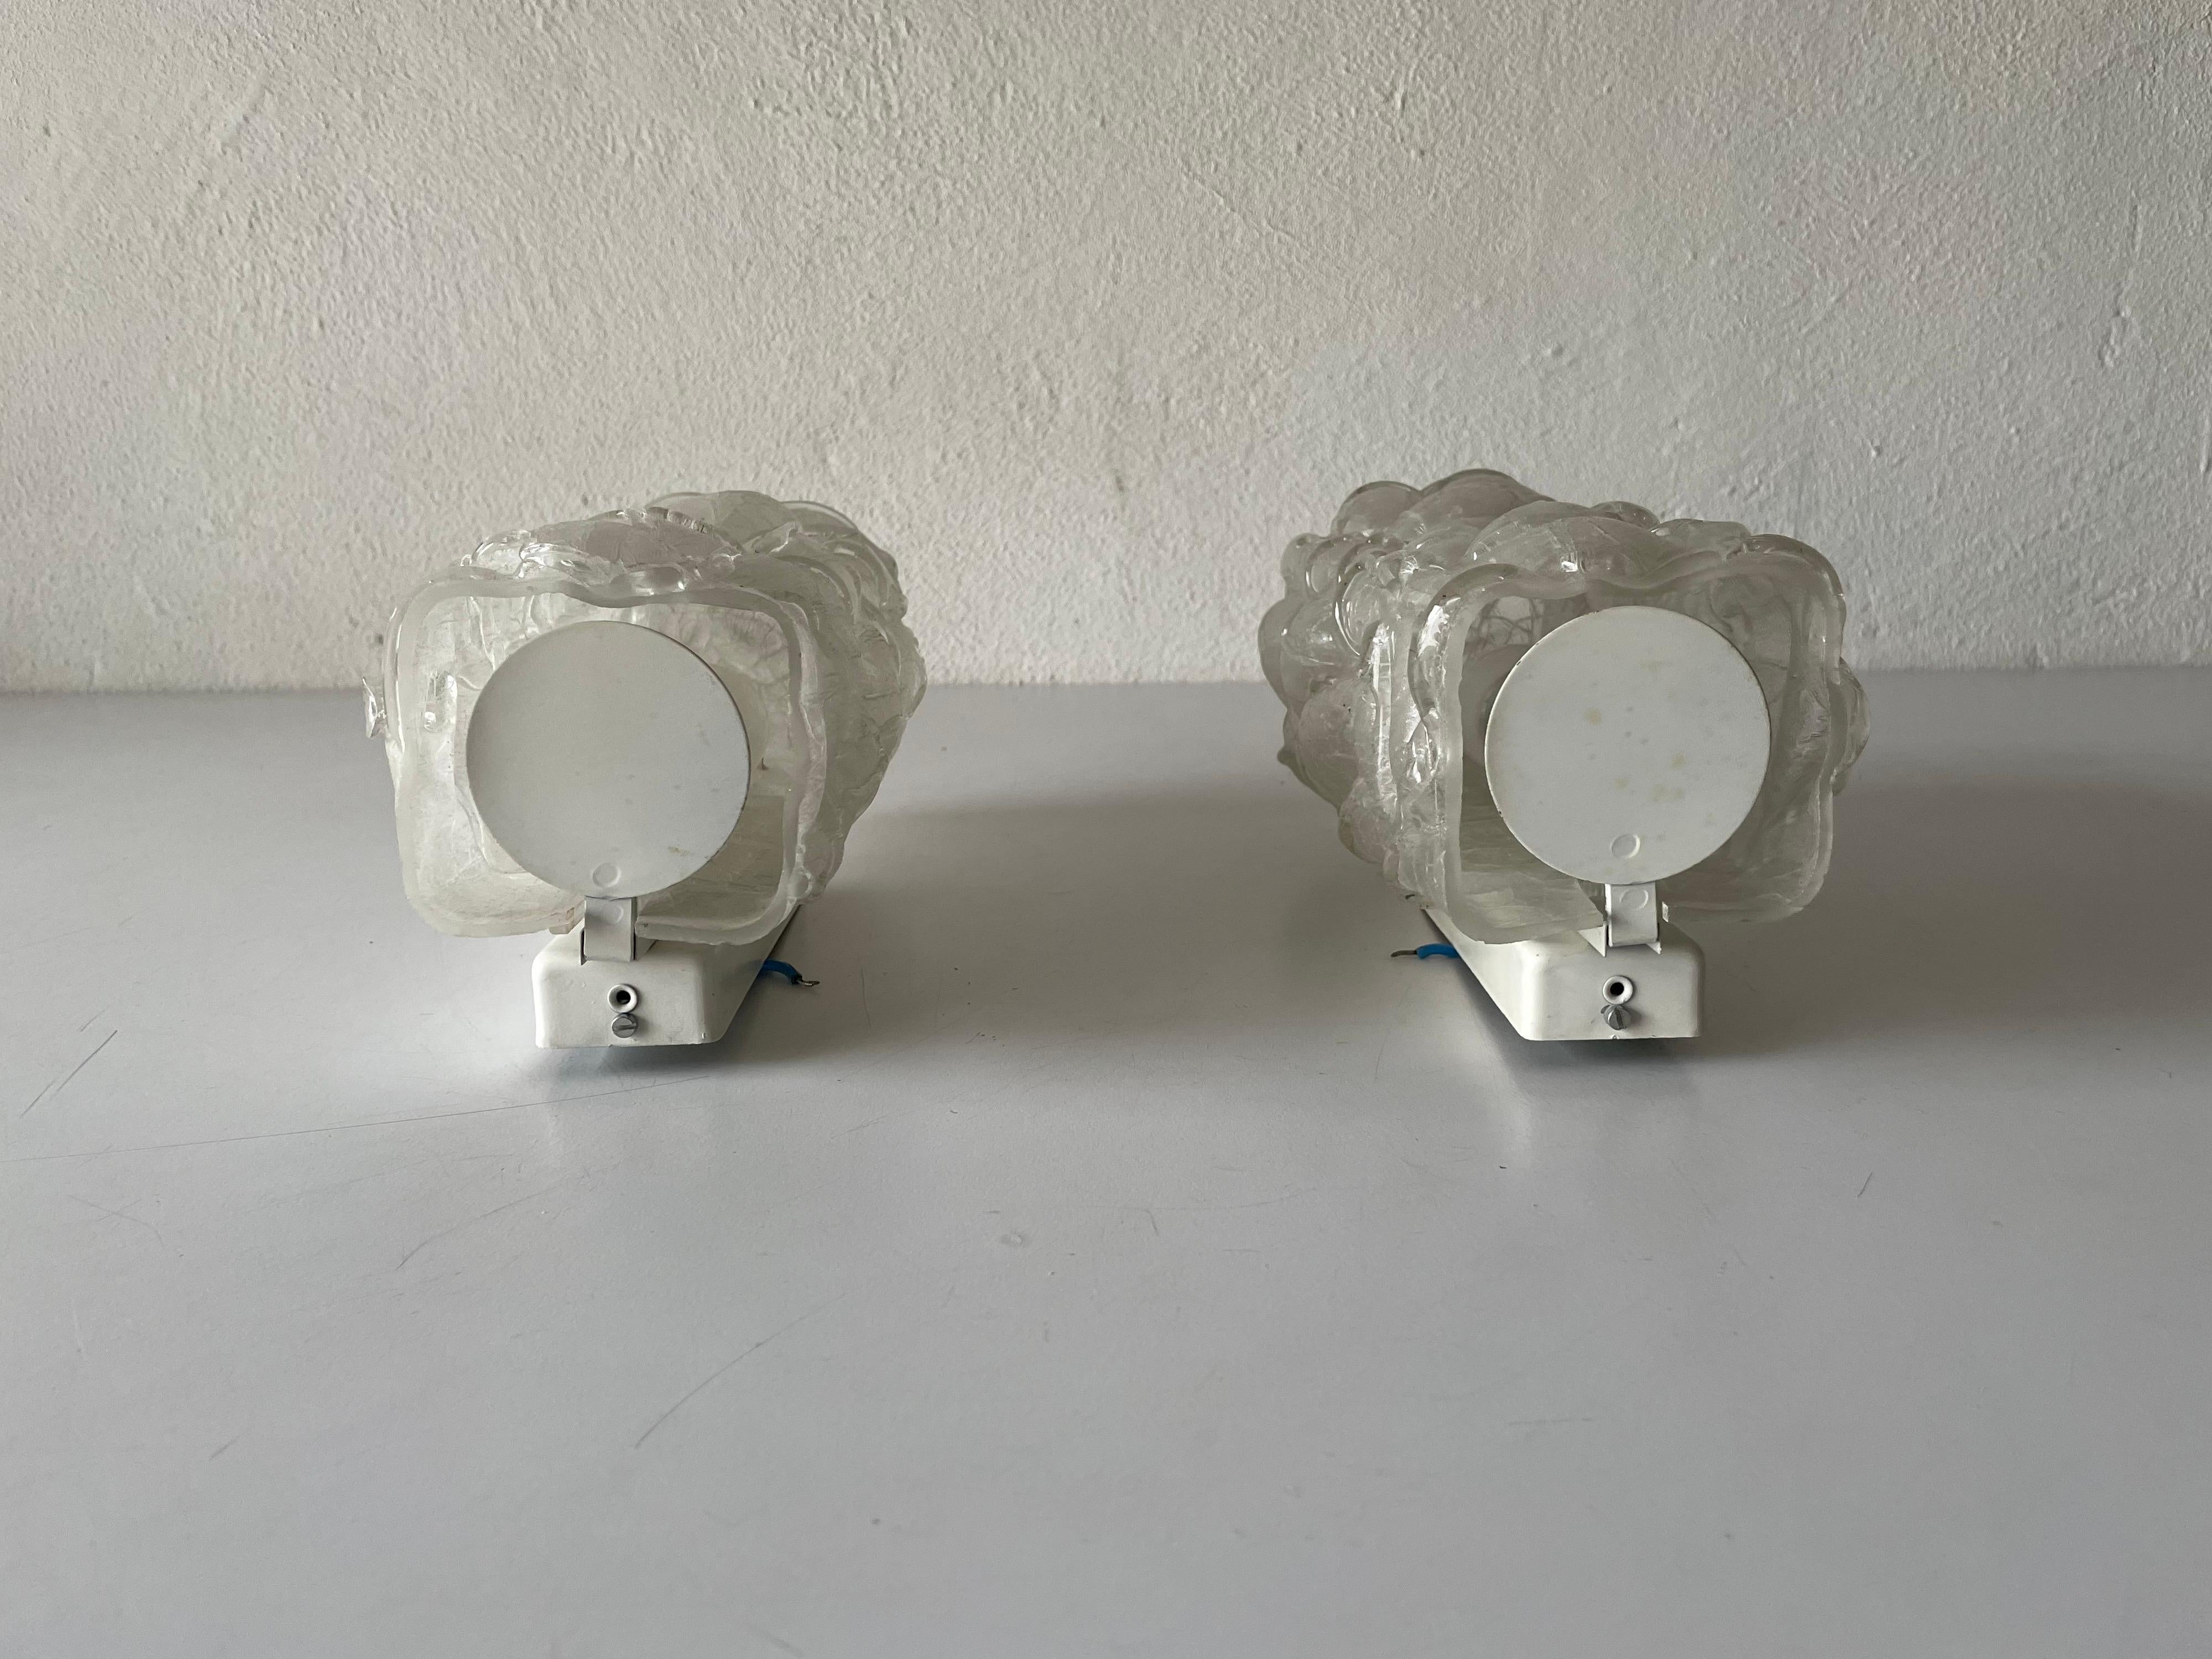 Metal Crystal Glass in Exceptional Shape Pair of Rare Sconces by Doria, 1960s, Germany For Sale